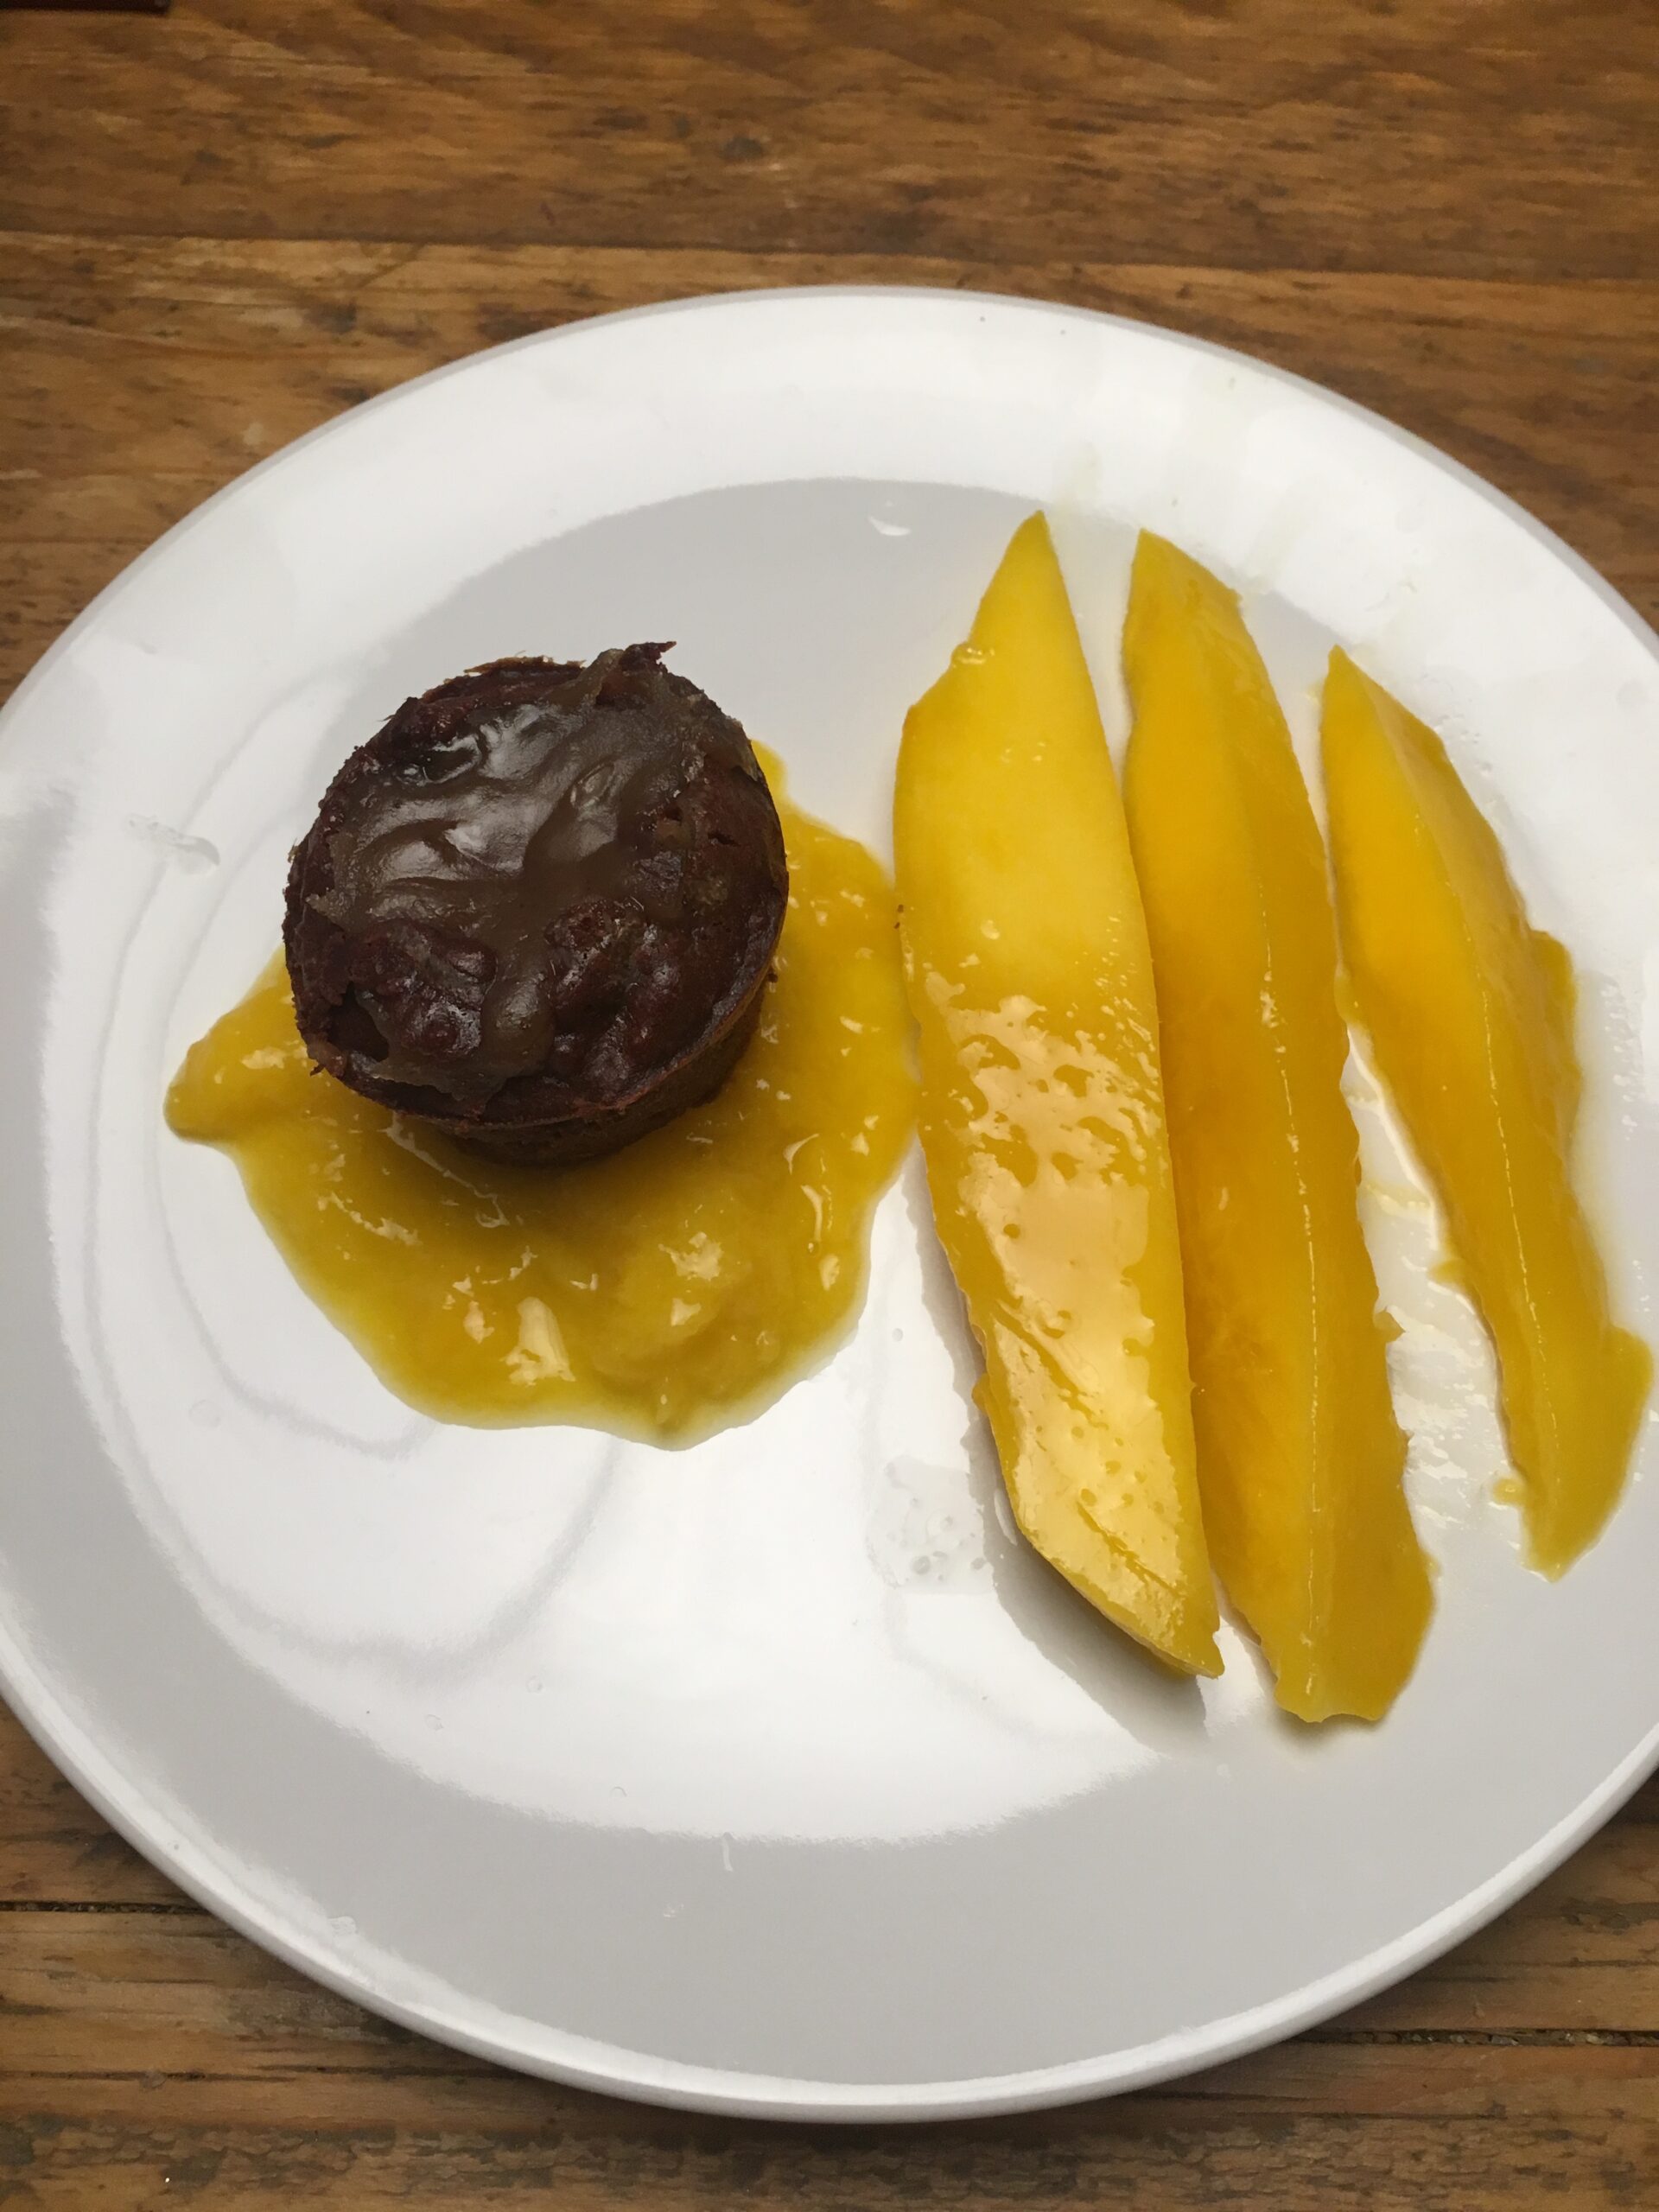 Chocolate and chestnut cream brownies with mango